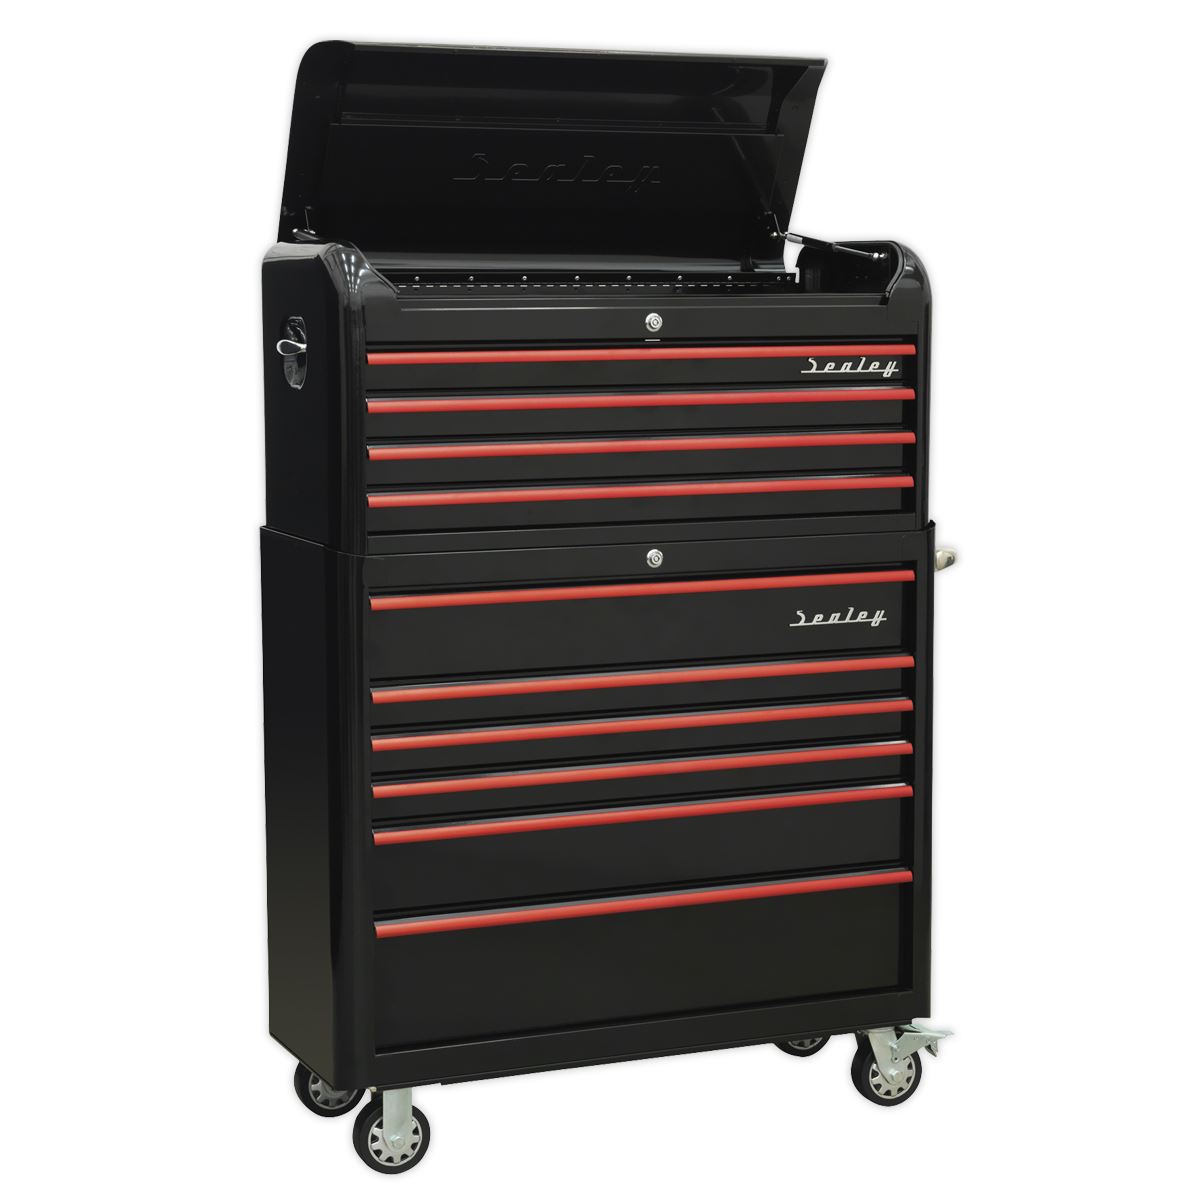 Sealey Premier Retro Style Wide Topchest & Rollcab Combination 10 Drawer-Black with Red Anodised Drawer Pulls